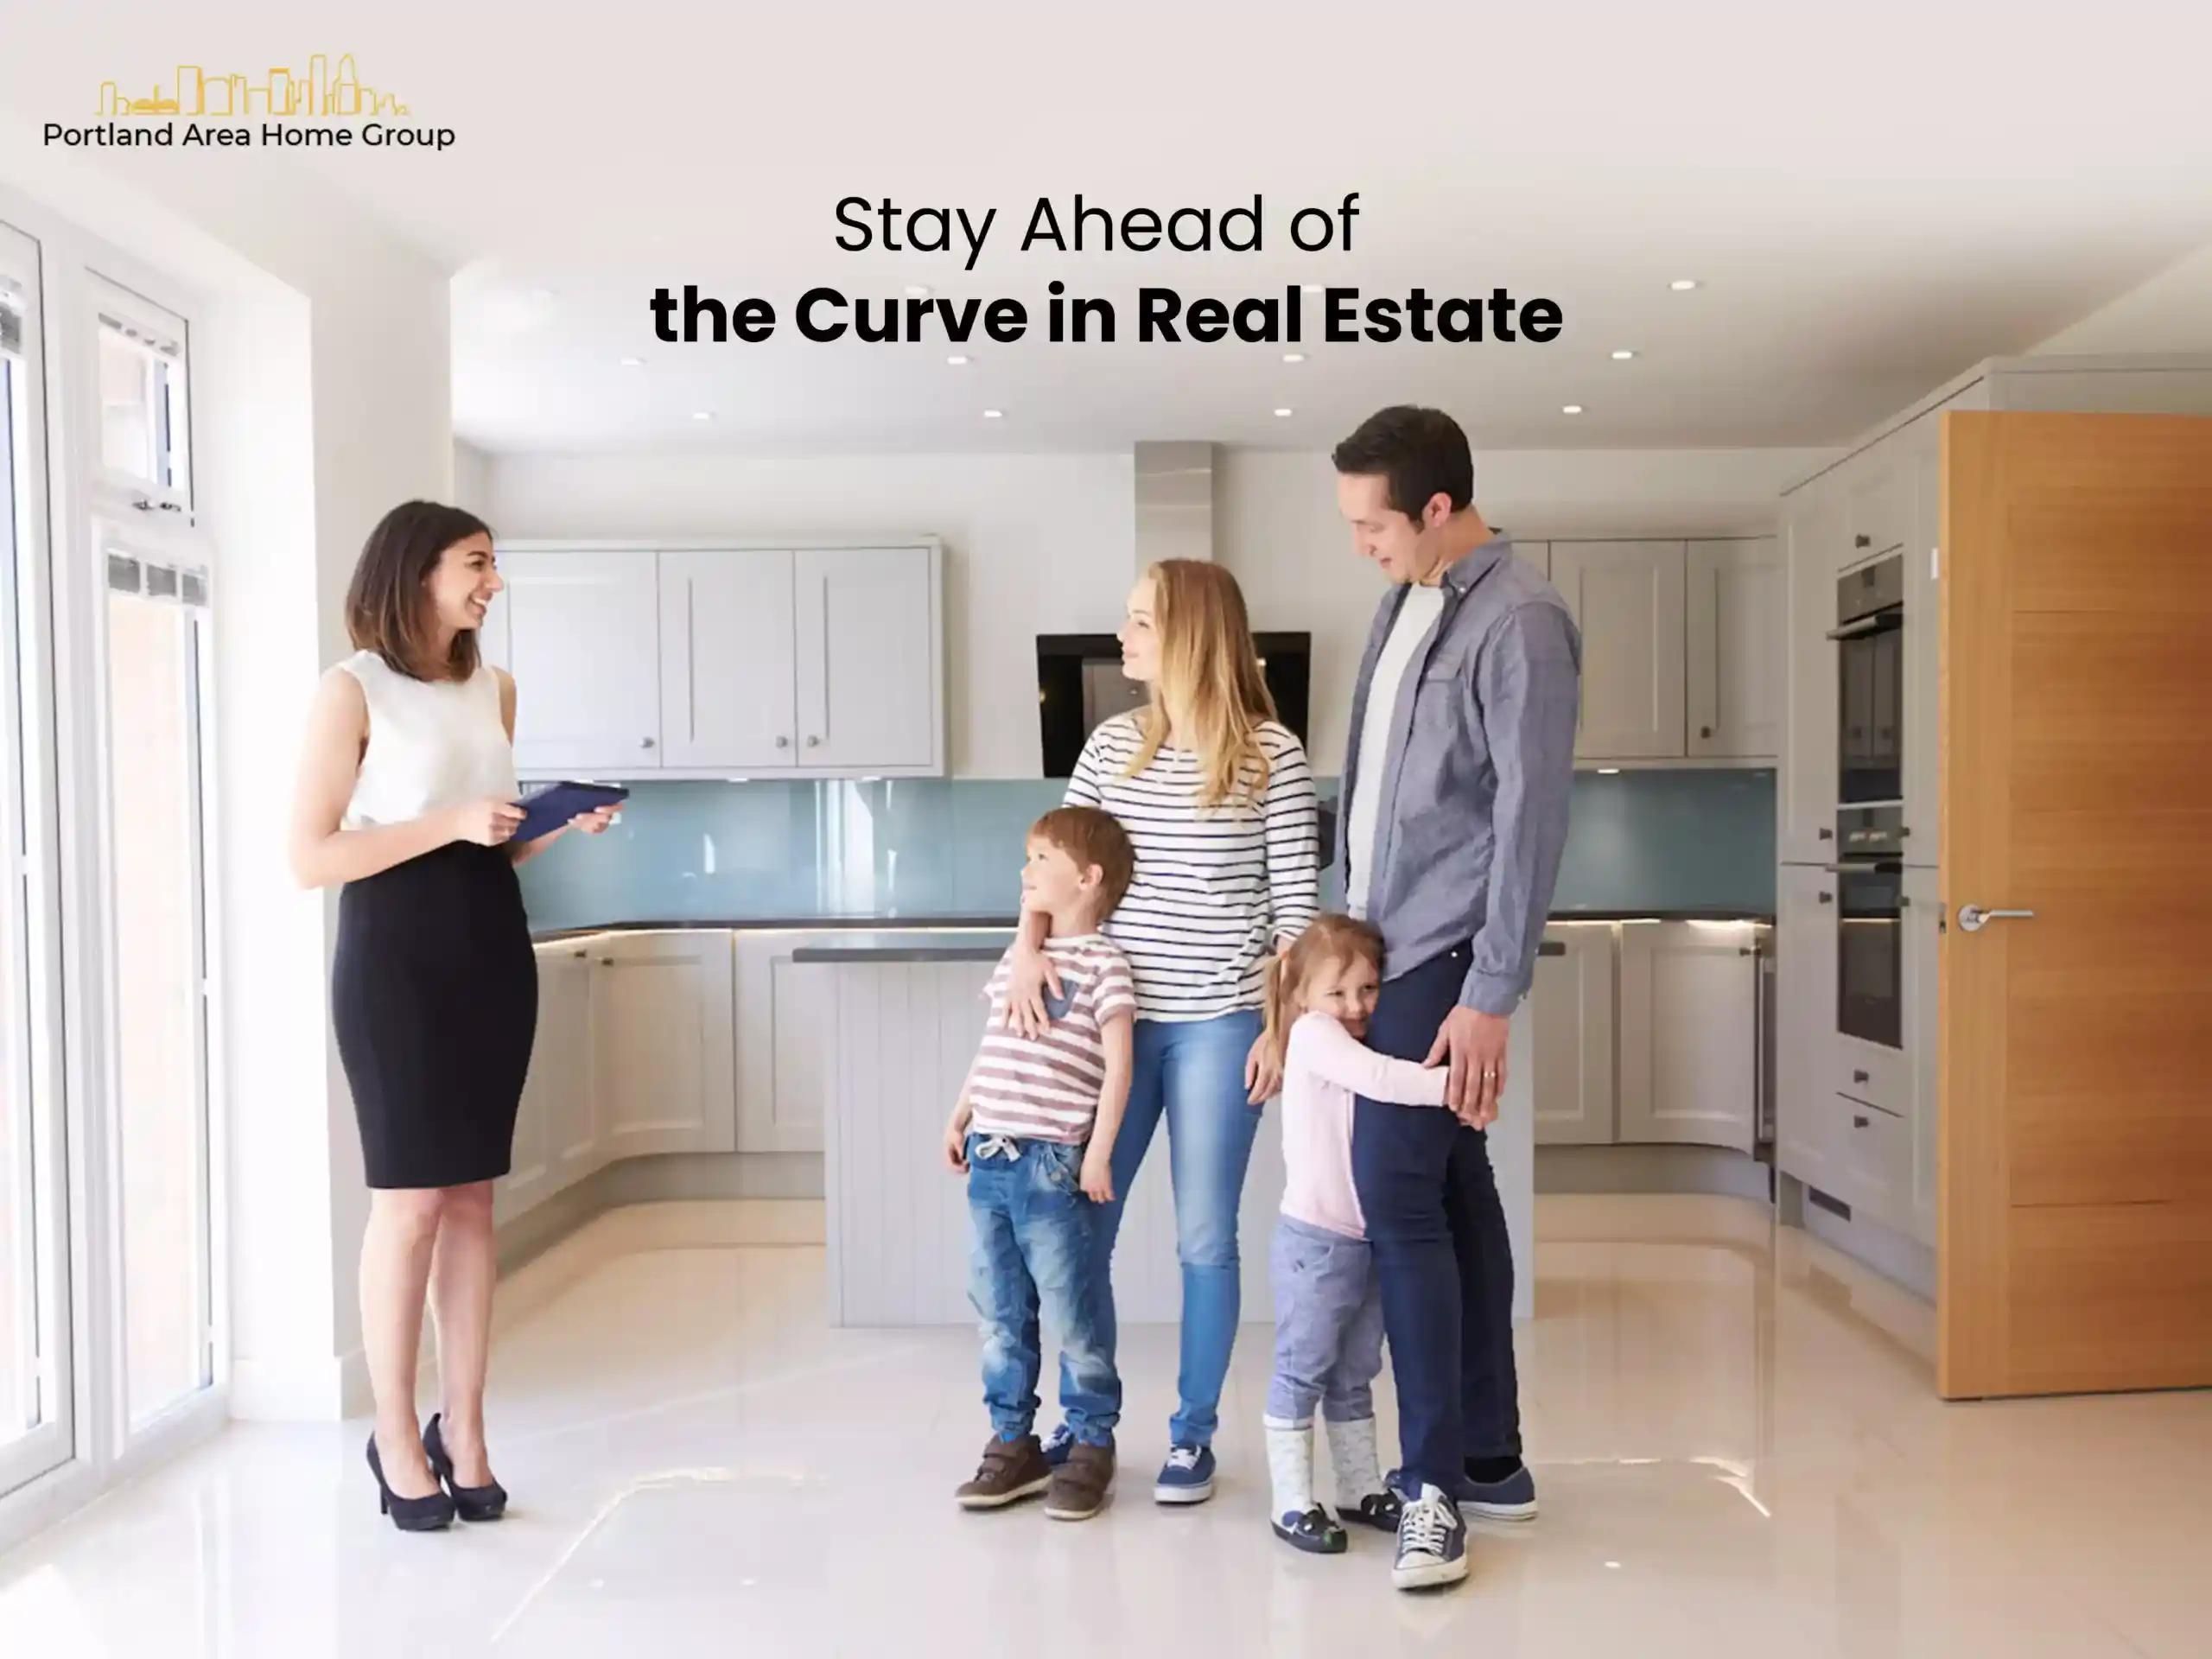 Stay Ahead of the Curve in Real Estate